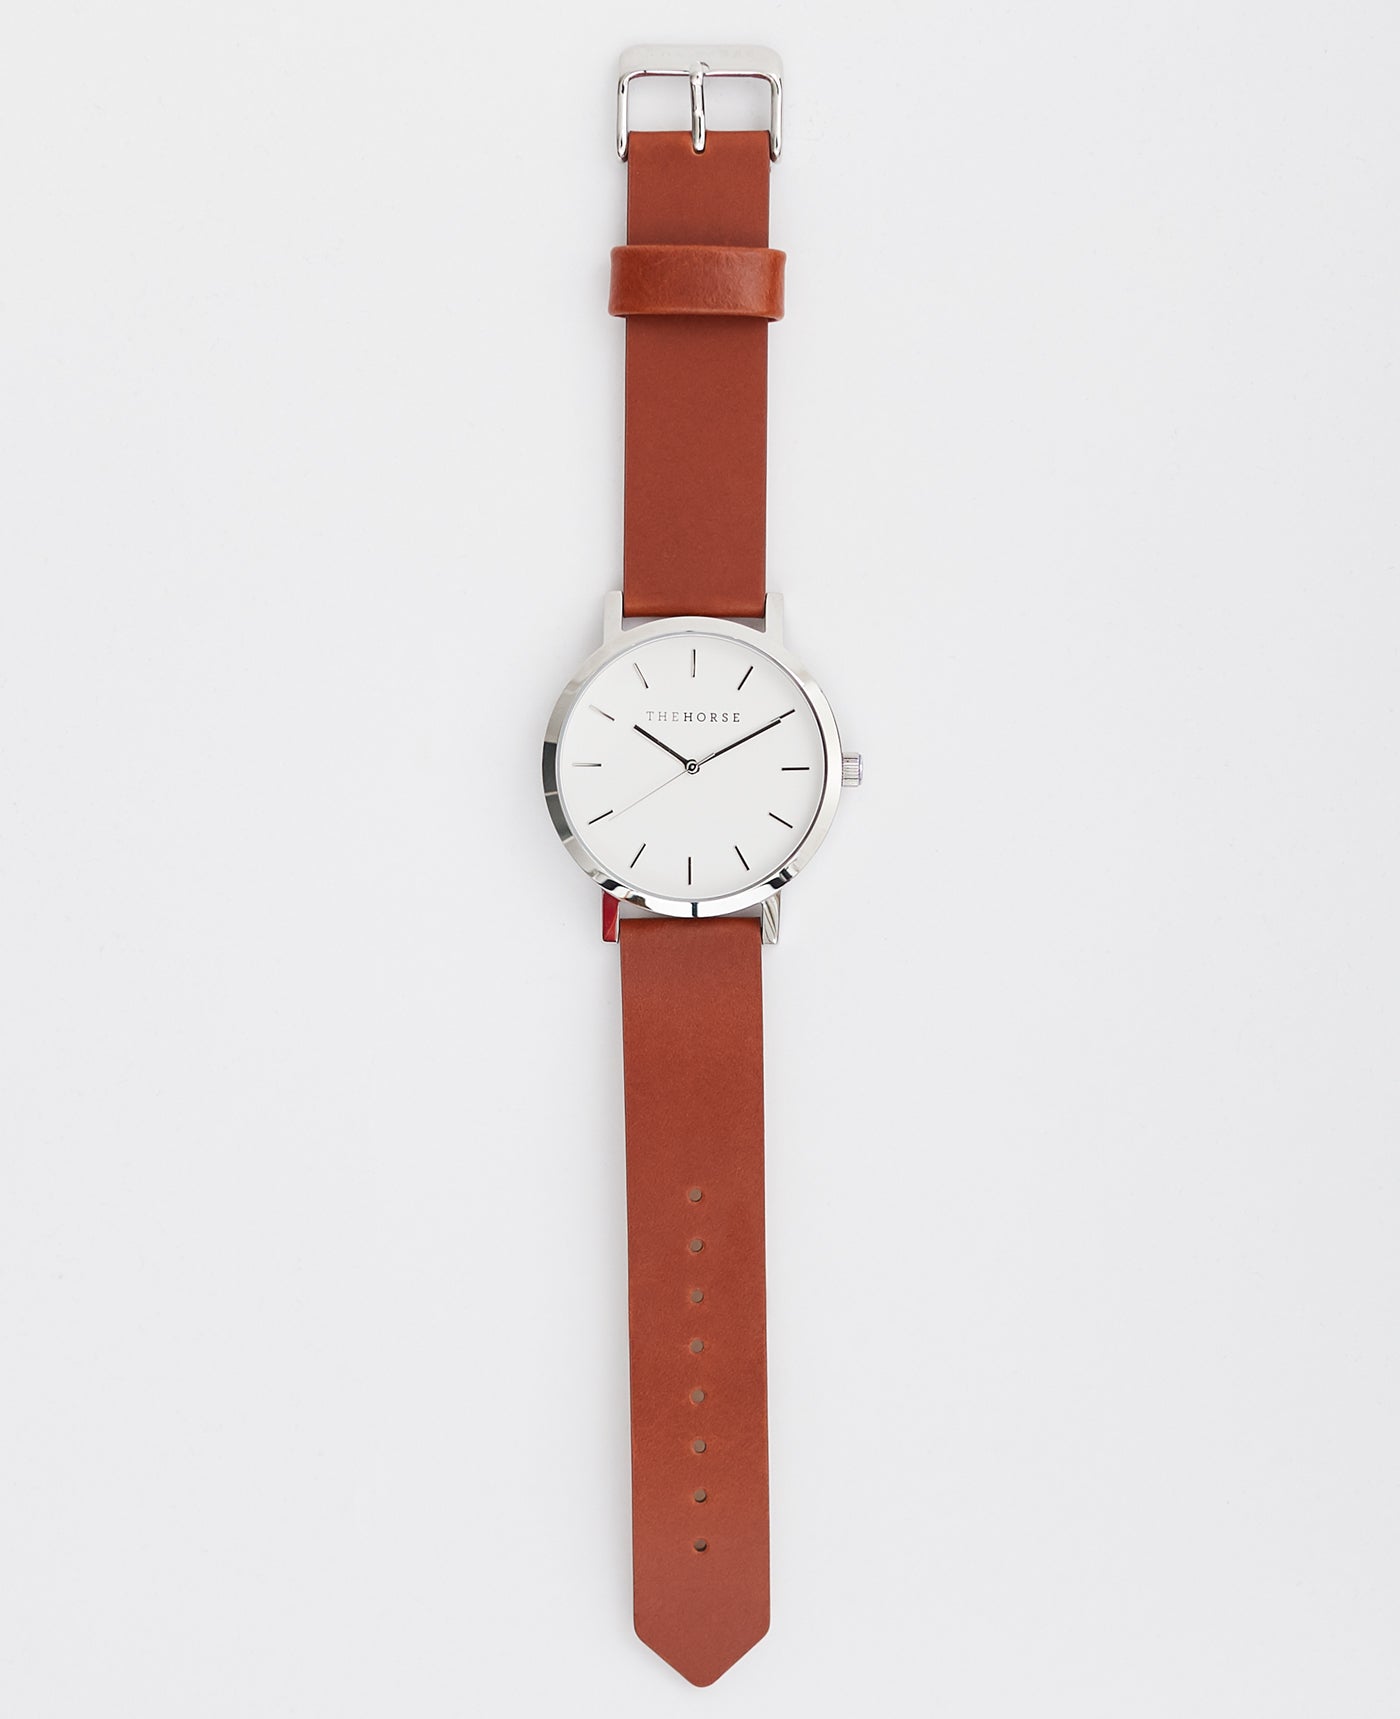 The Original Watch Polished Steel / White Face / Tan Leather Strap by The Horse